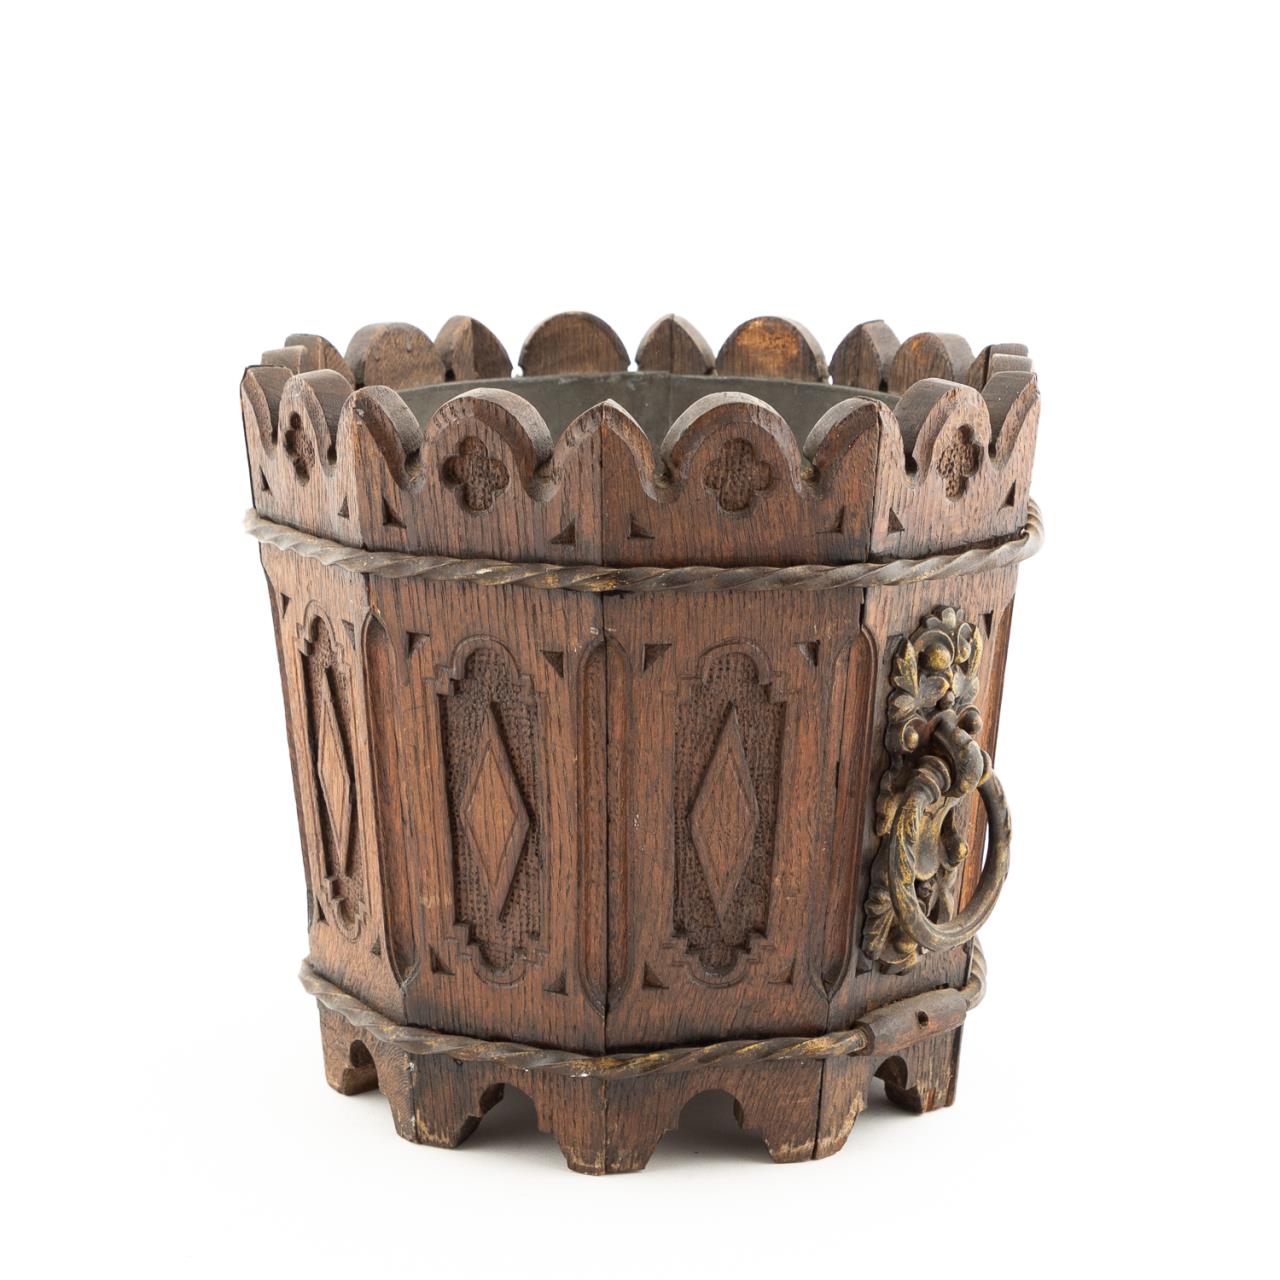 19TH C. FRENCH OAK, IRON AND LEAD